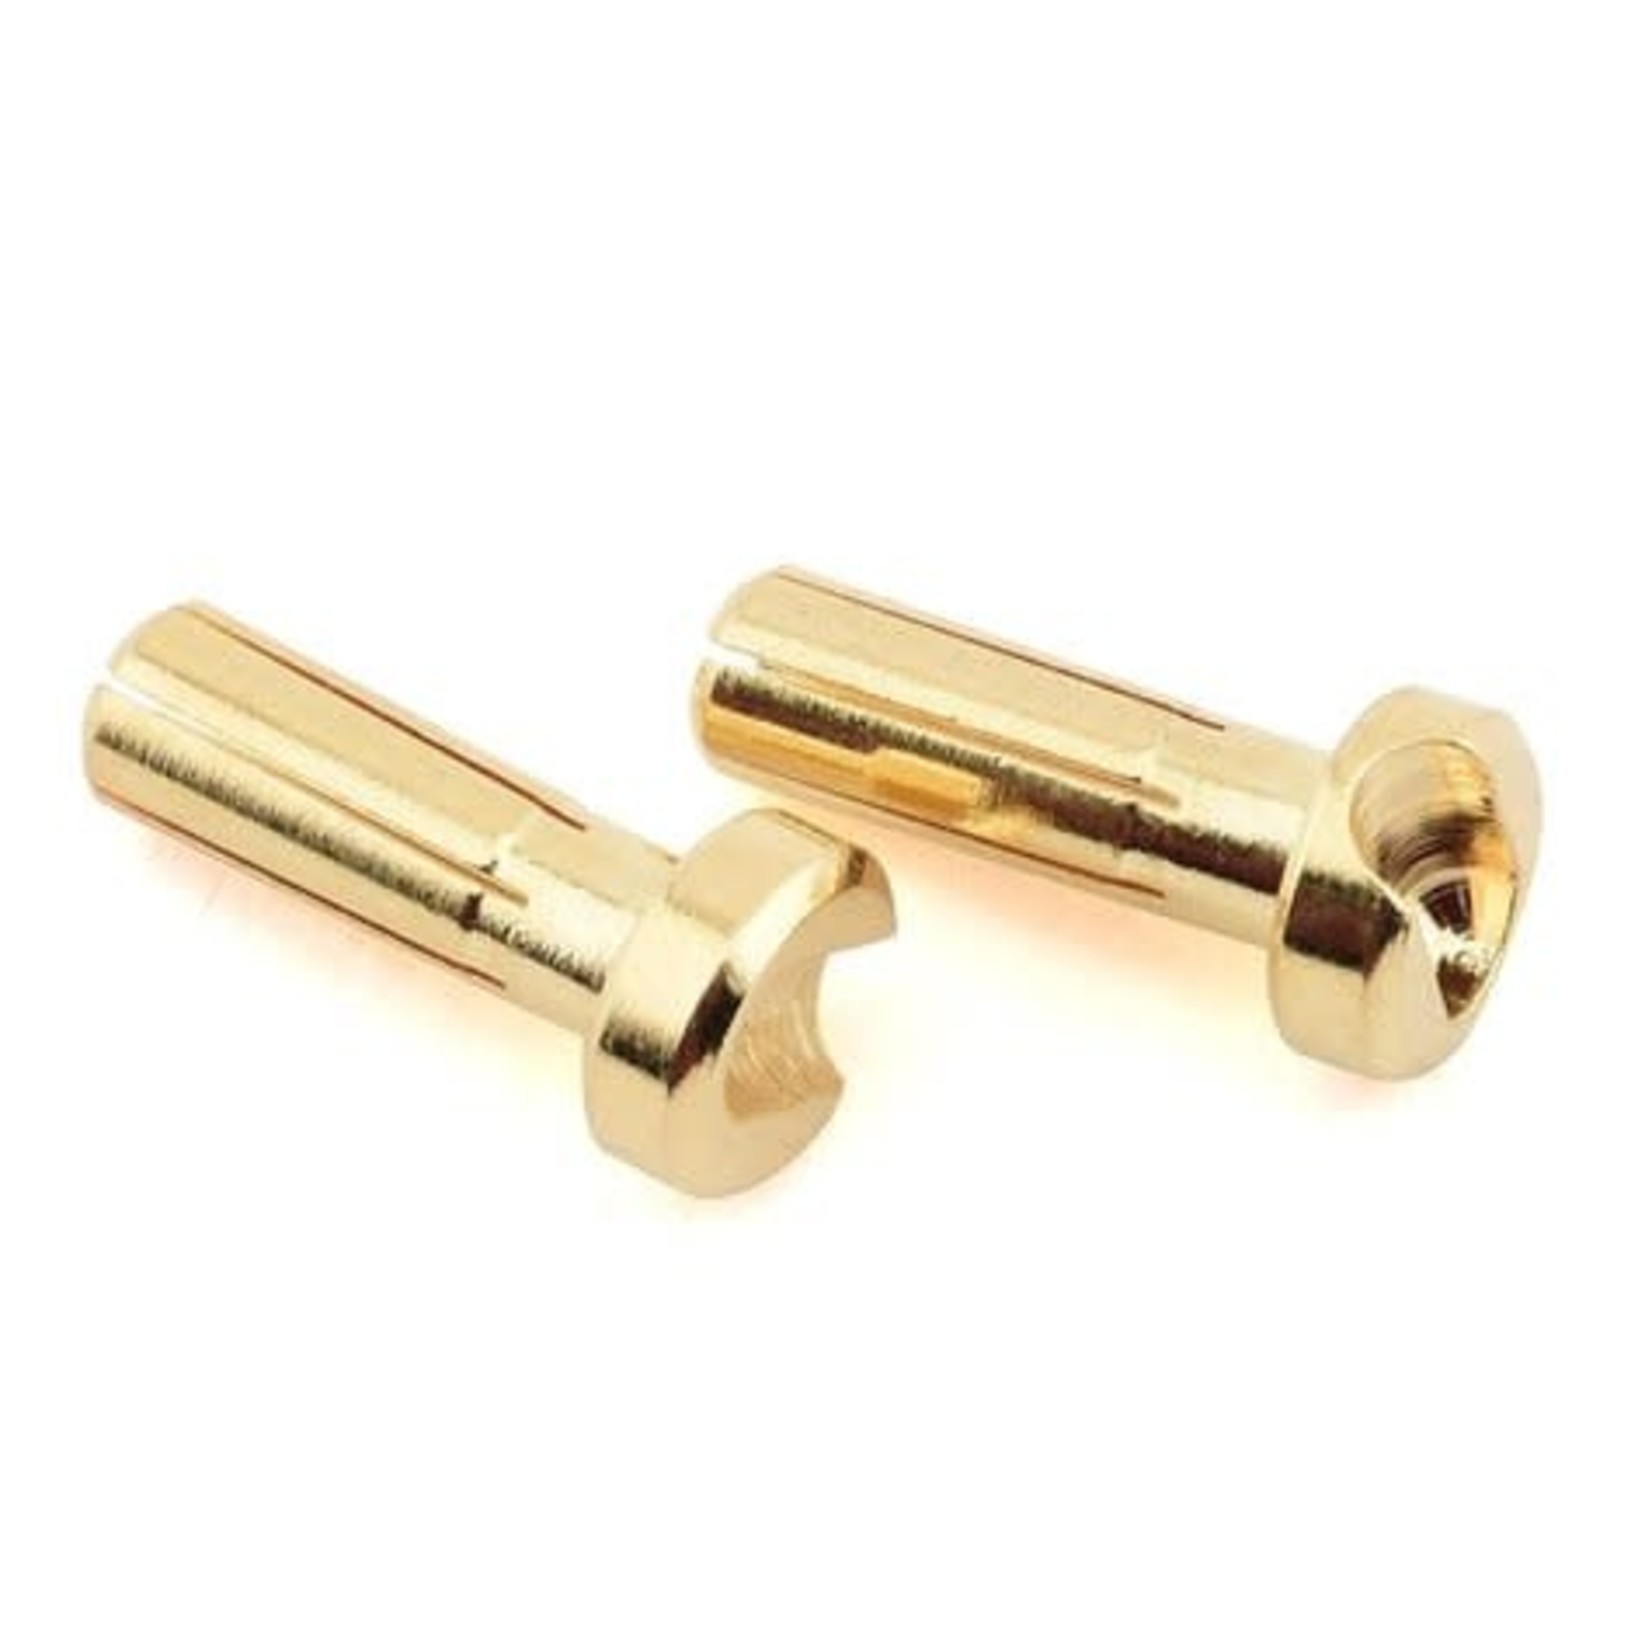 1UP 1UP Racing 4mm LowPro Bullet Plugs (2)